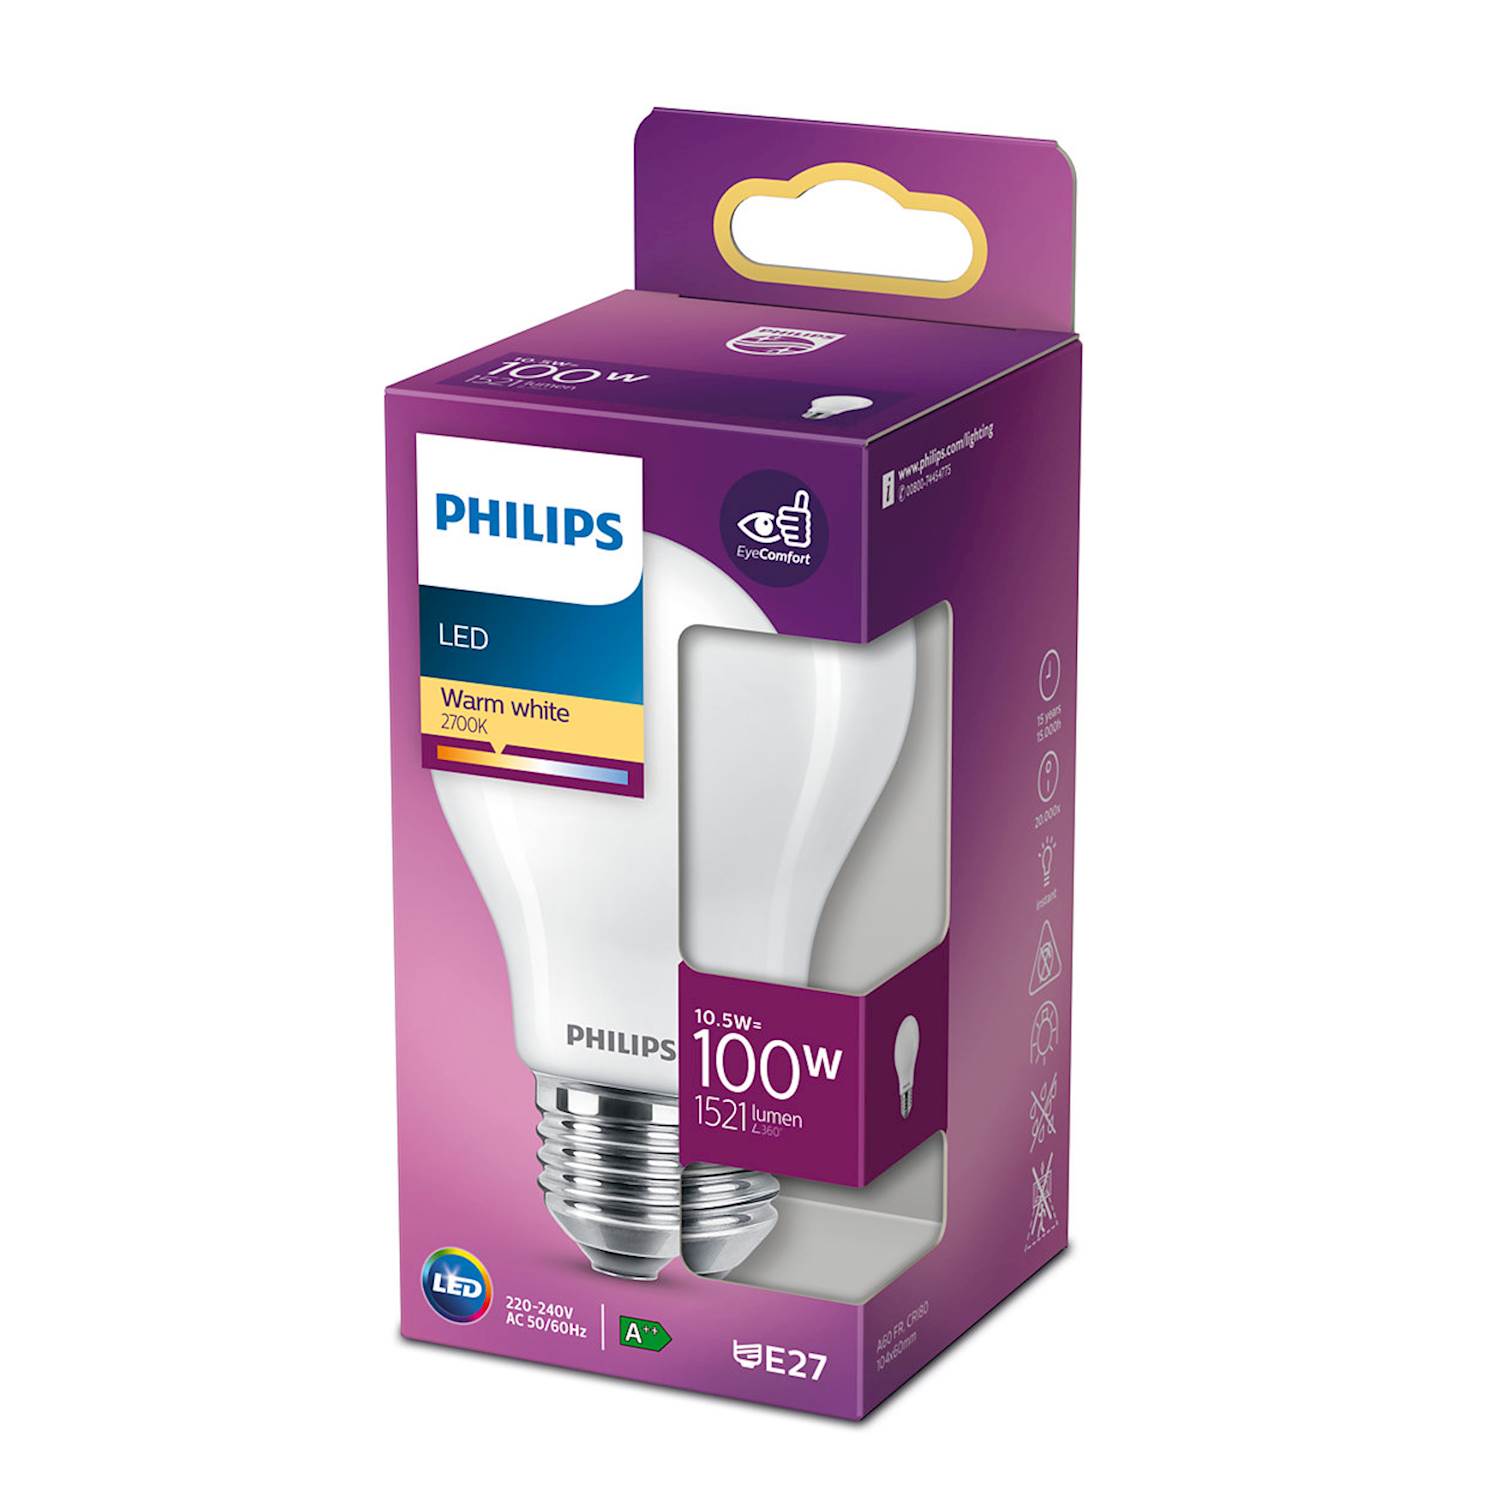 Philips LED Classic 100w e27 norm nd